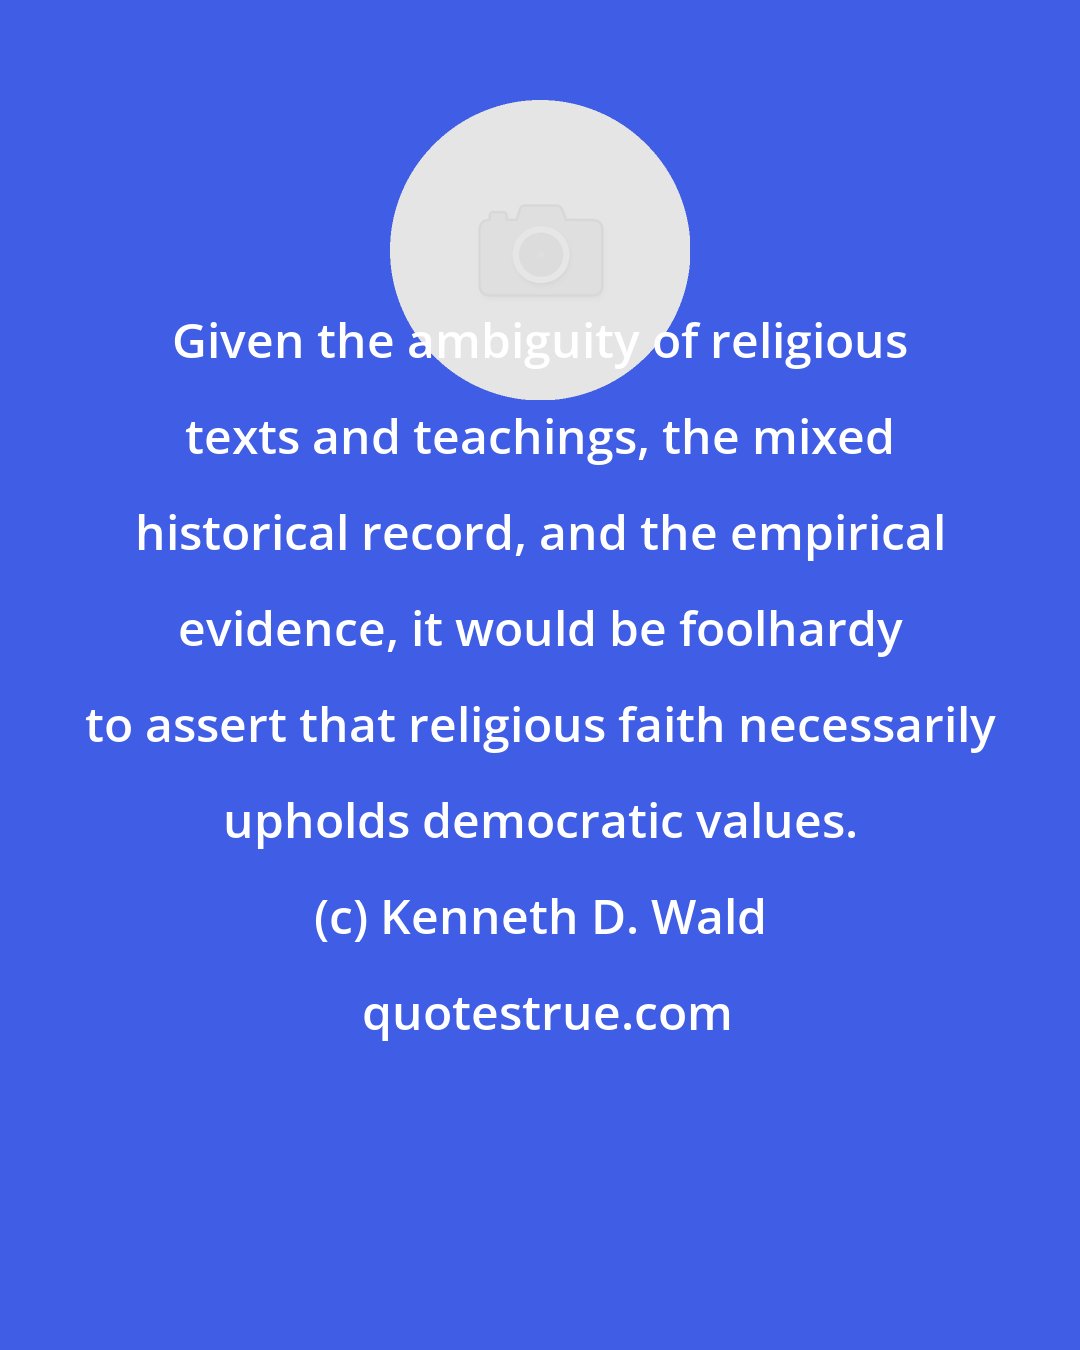 Kenneth D. Wald: Given the ambiguity of religious texts and teachings, the mixed historical record, and the empirical evidence, it would be foolhardy to assert that religious faith necessarily upholds democratic values.